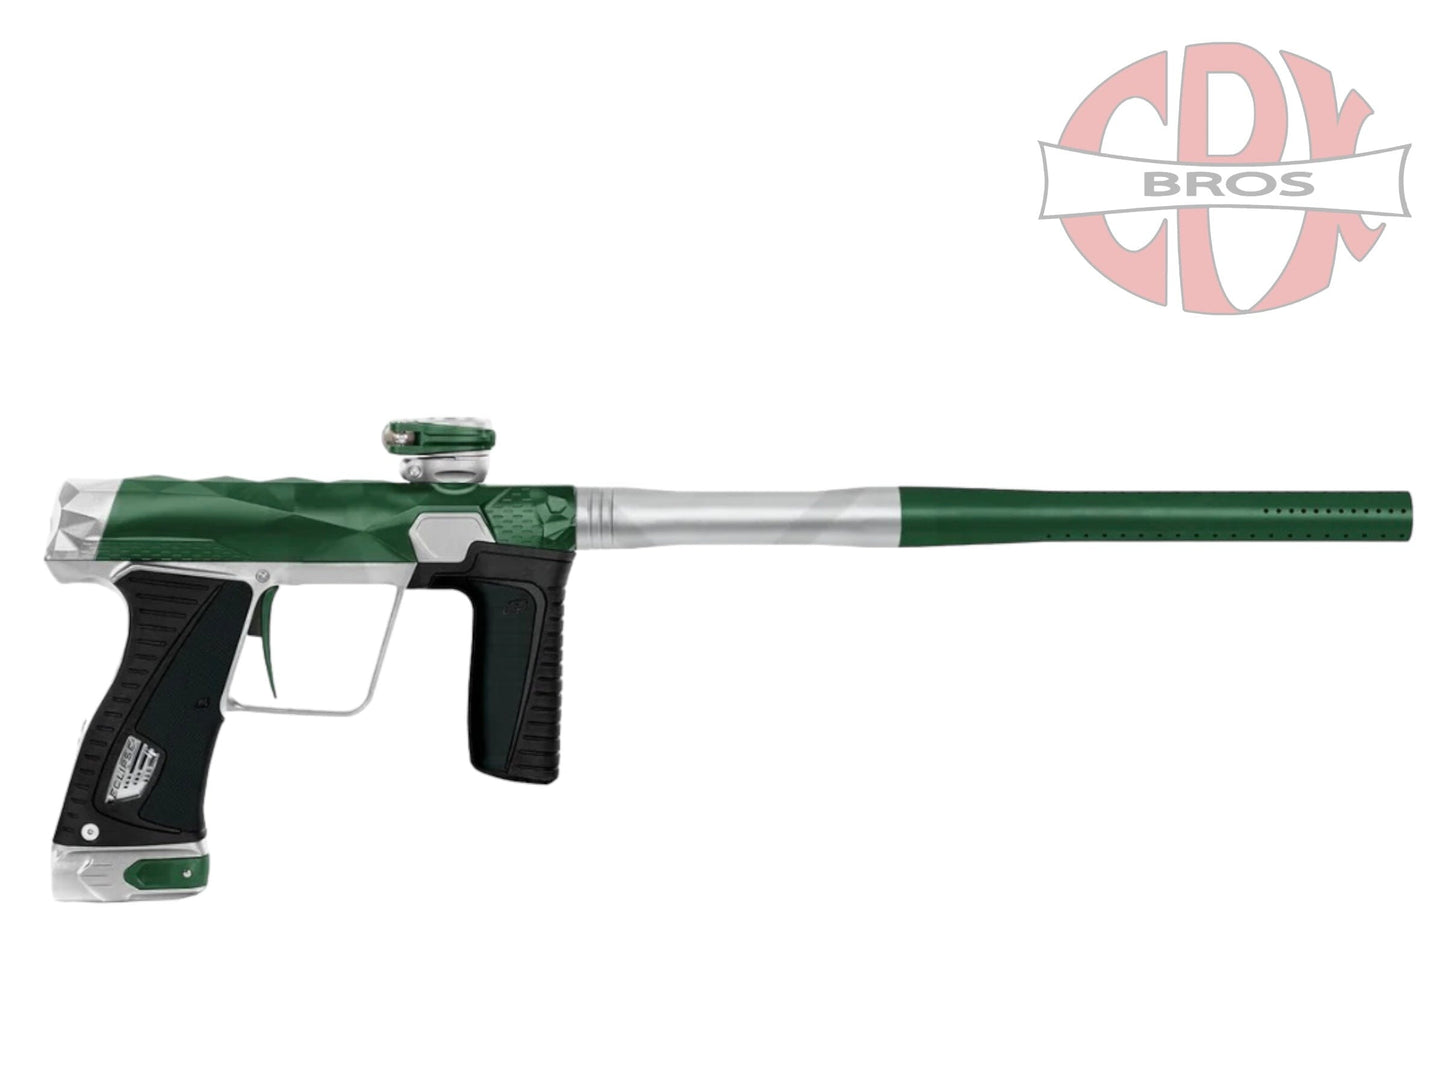 Used NEW INFAMOUS DIAMOND SKULL 180R - GREEN/SILVER Paintball Gun from CPXBrosPaintball Buy/Sell/Trade Paintball Markers, New Paintball Guns, Paintball Hoppers, Paintball Masks, and Hormesis Headbands